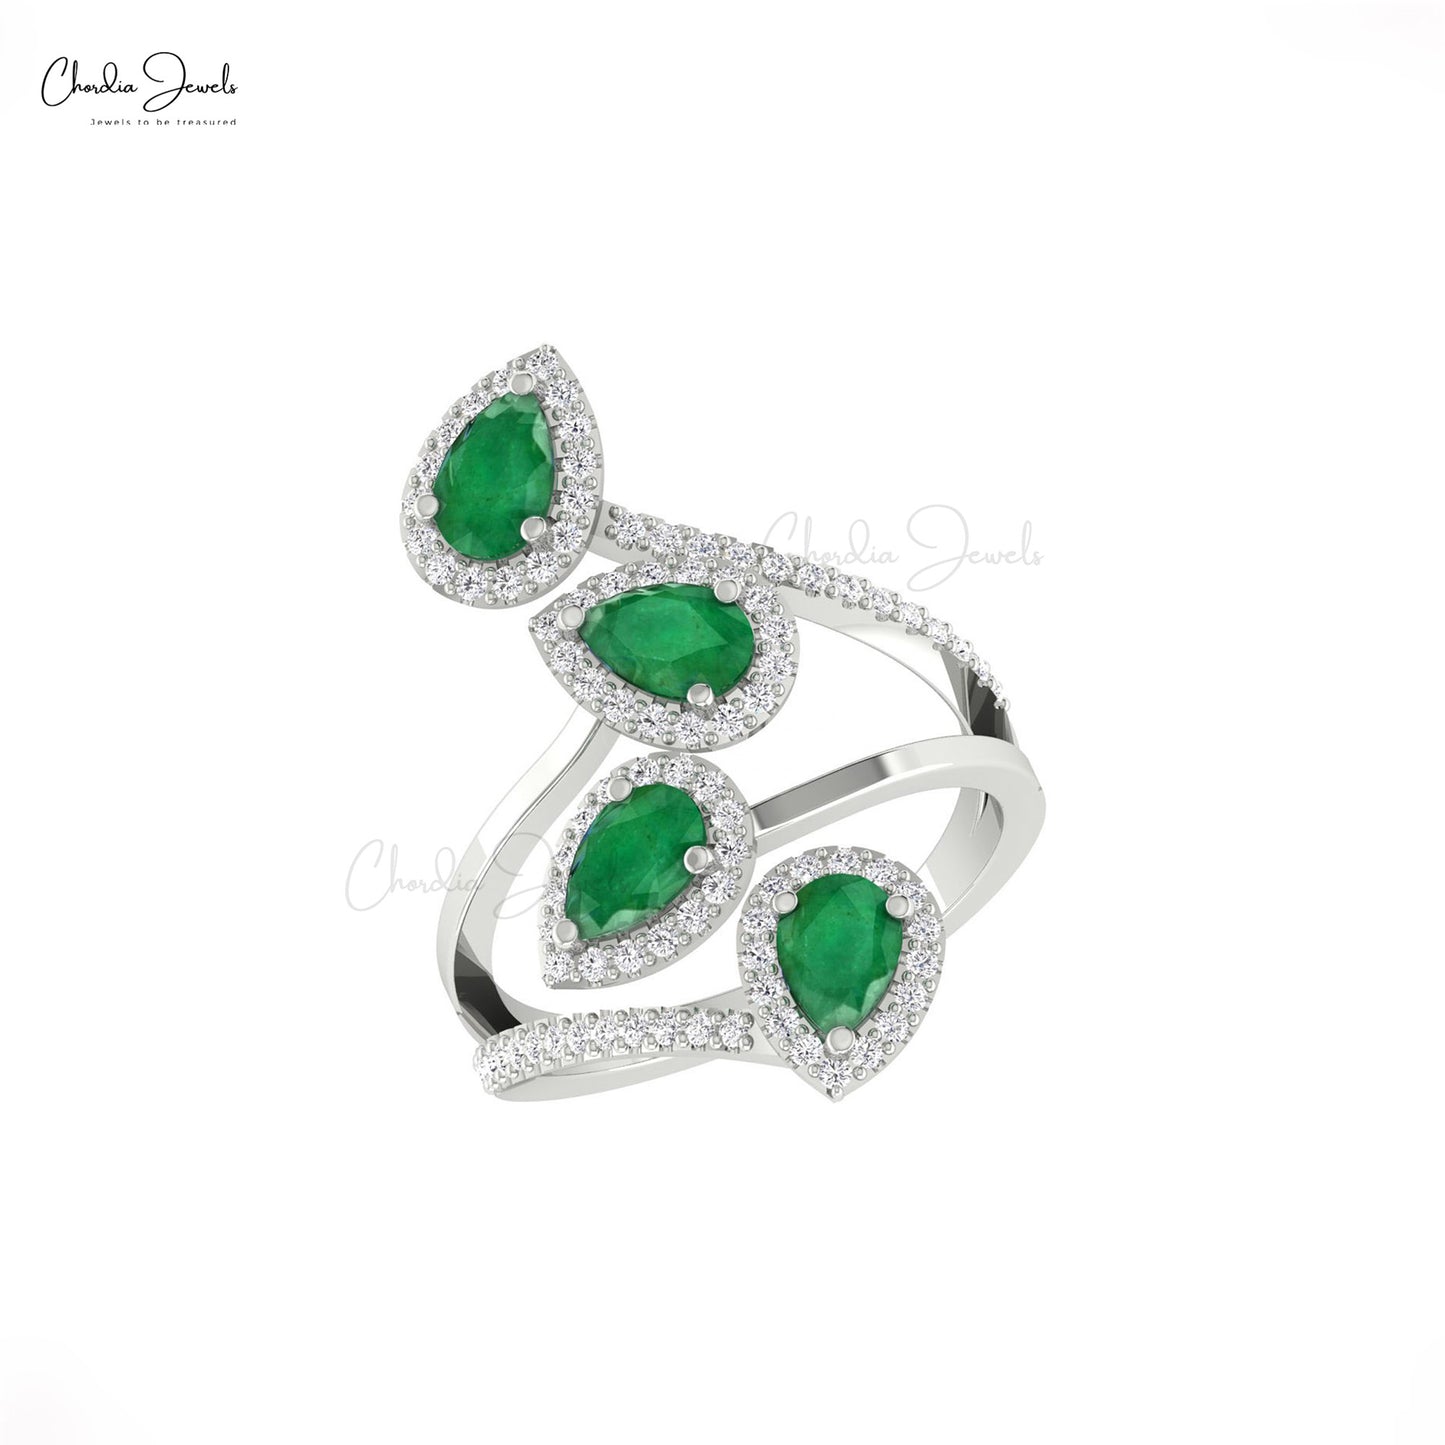 Elevate your elegance with this emerald halo wrap ring.